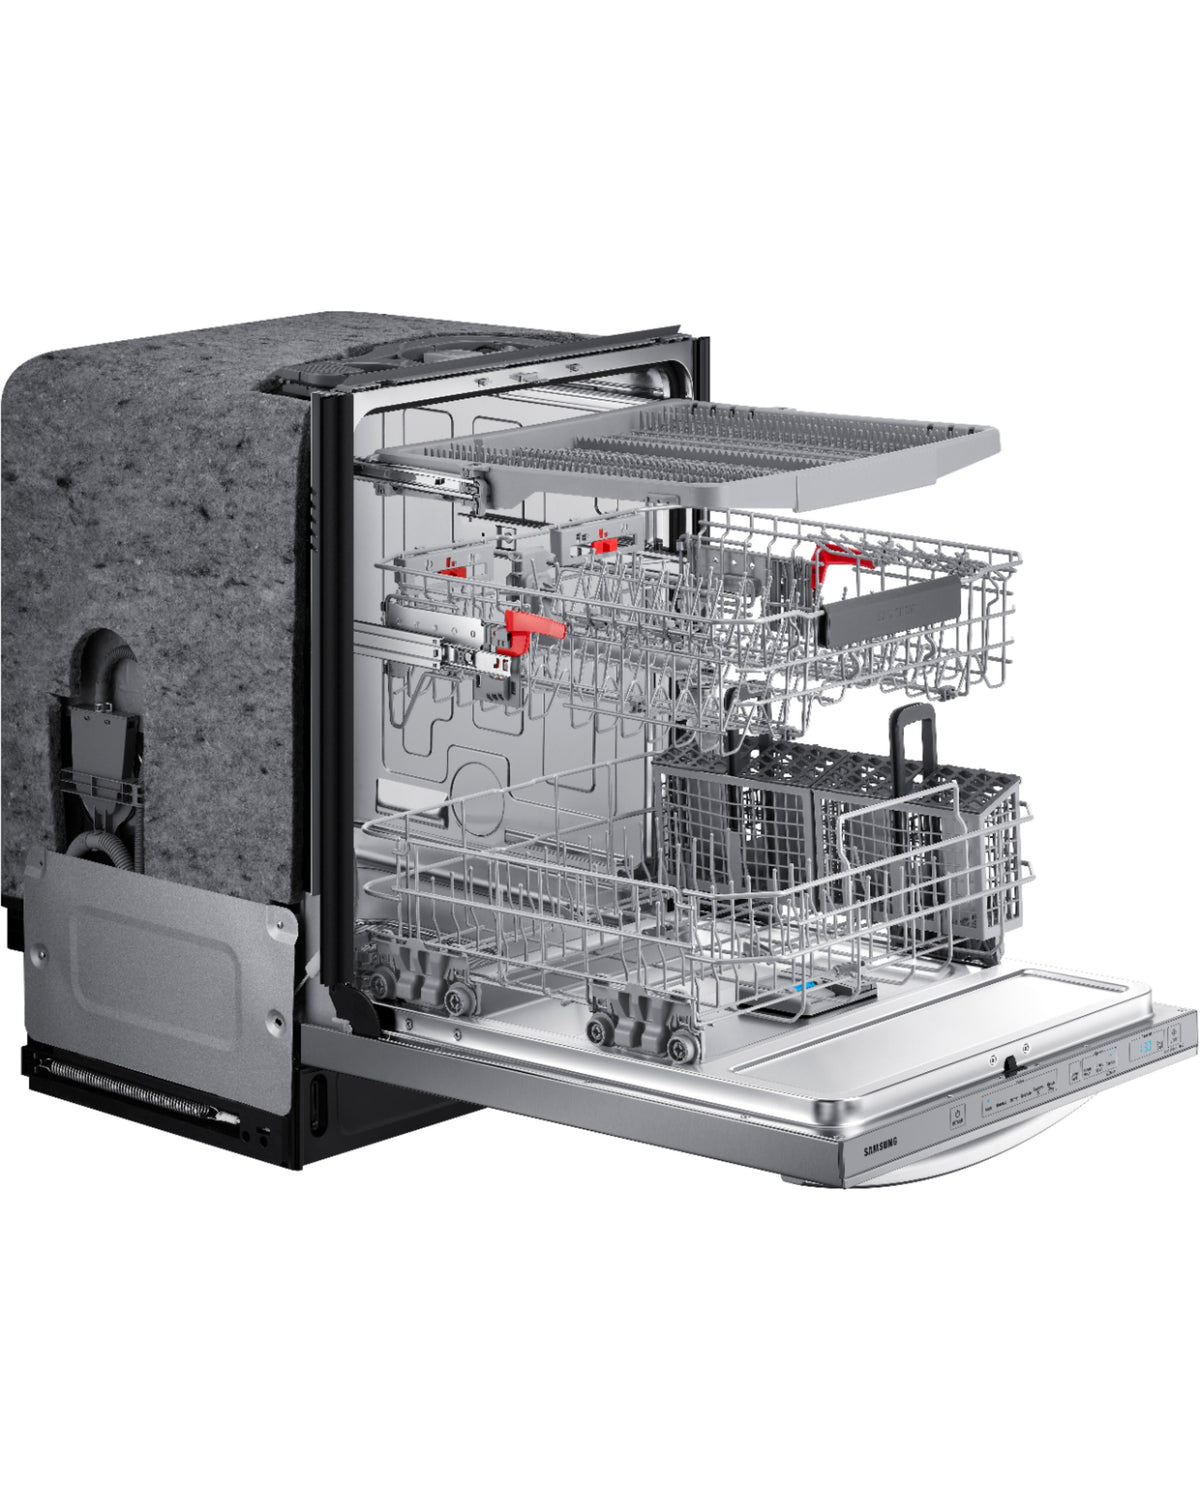 SAMSUNG DW80R7061US/AA Dishwasher in Stainless Steel